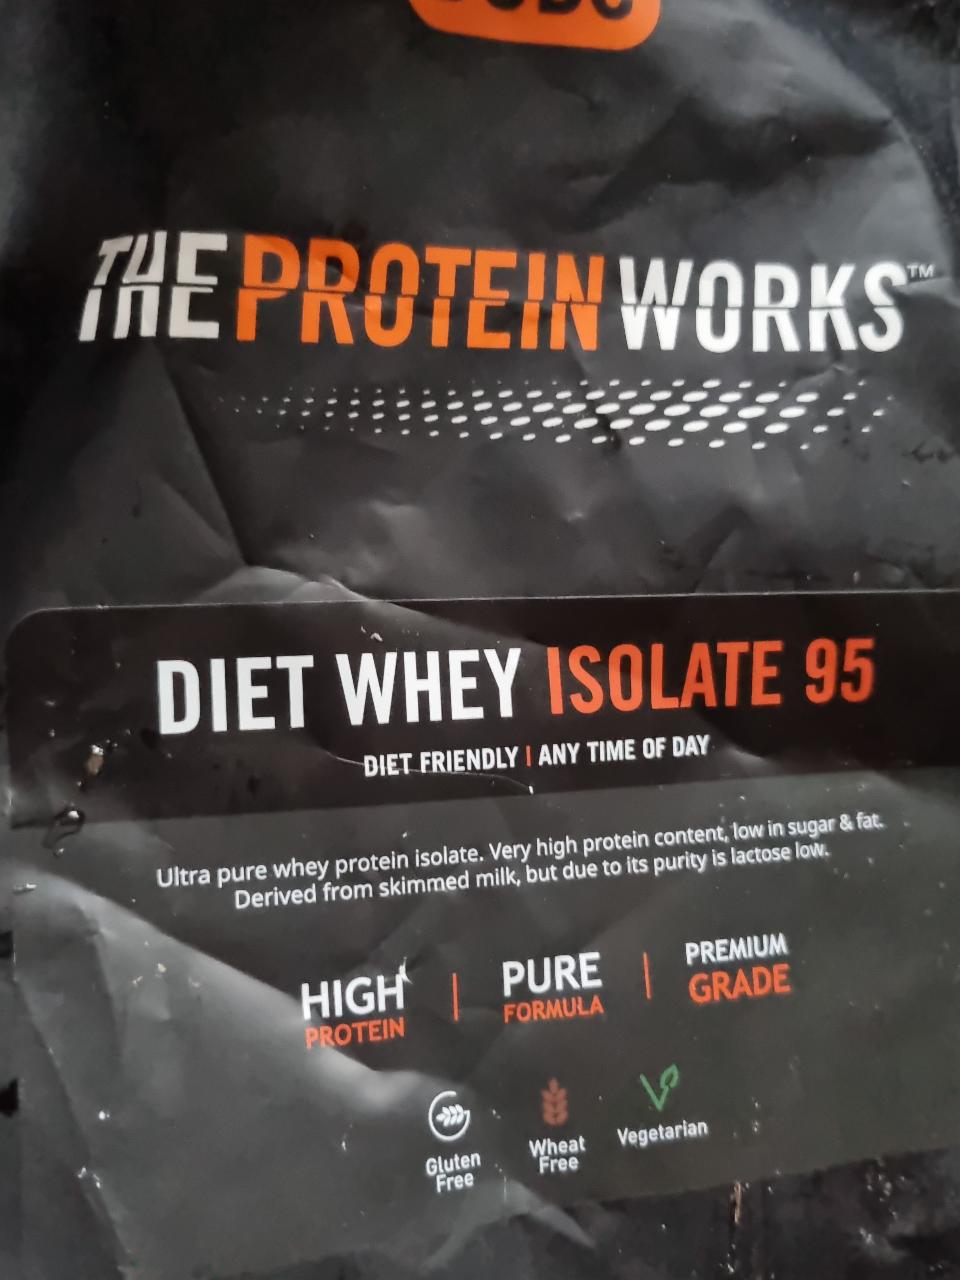 Fotografie - Diet whey Isolate 95 the protein works strawberries